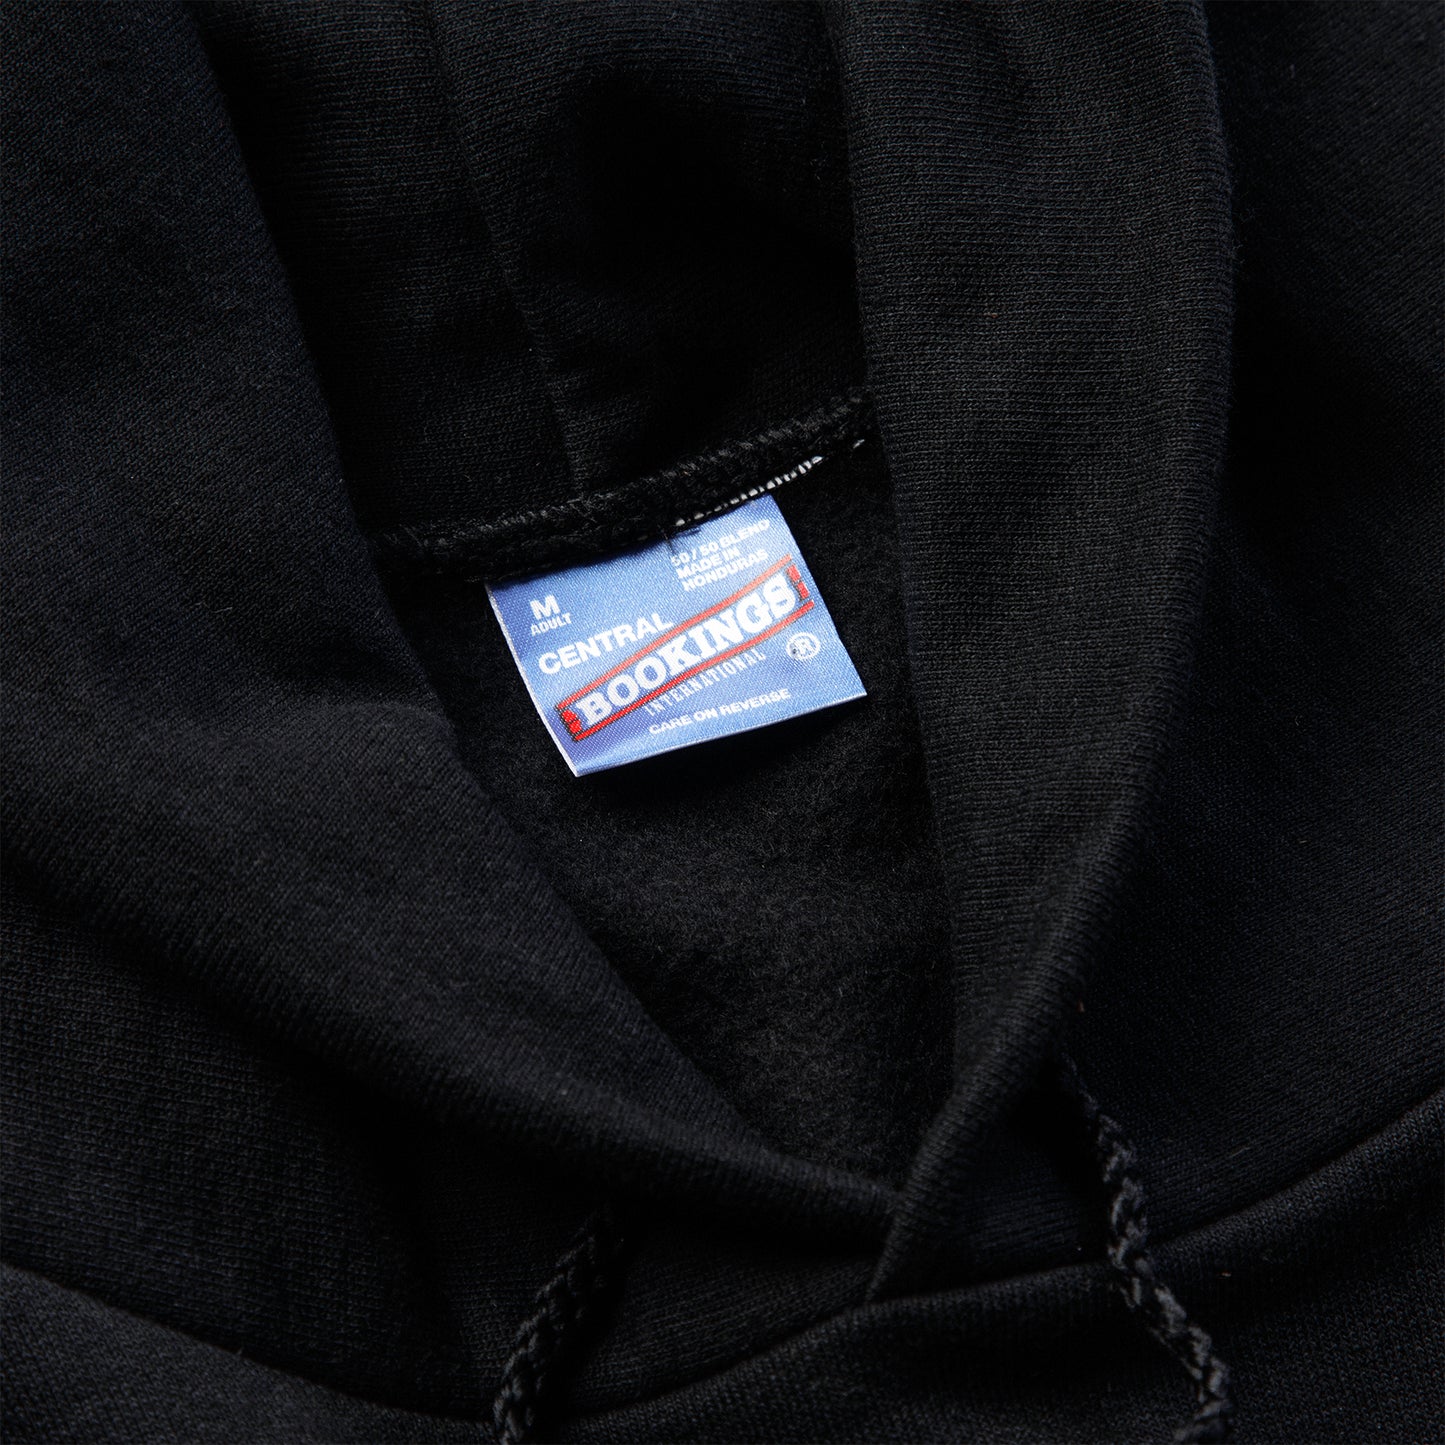 Central Bookings Built Different Hoodie (Black)